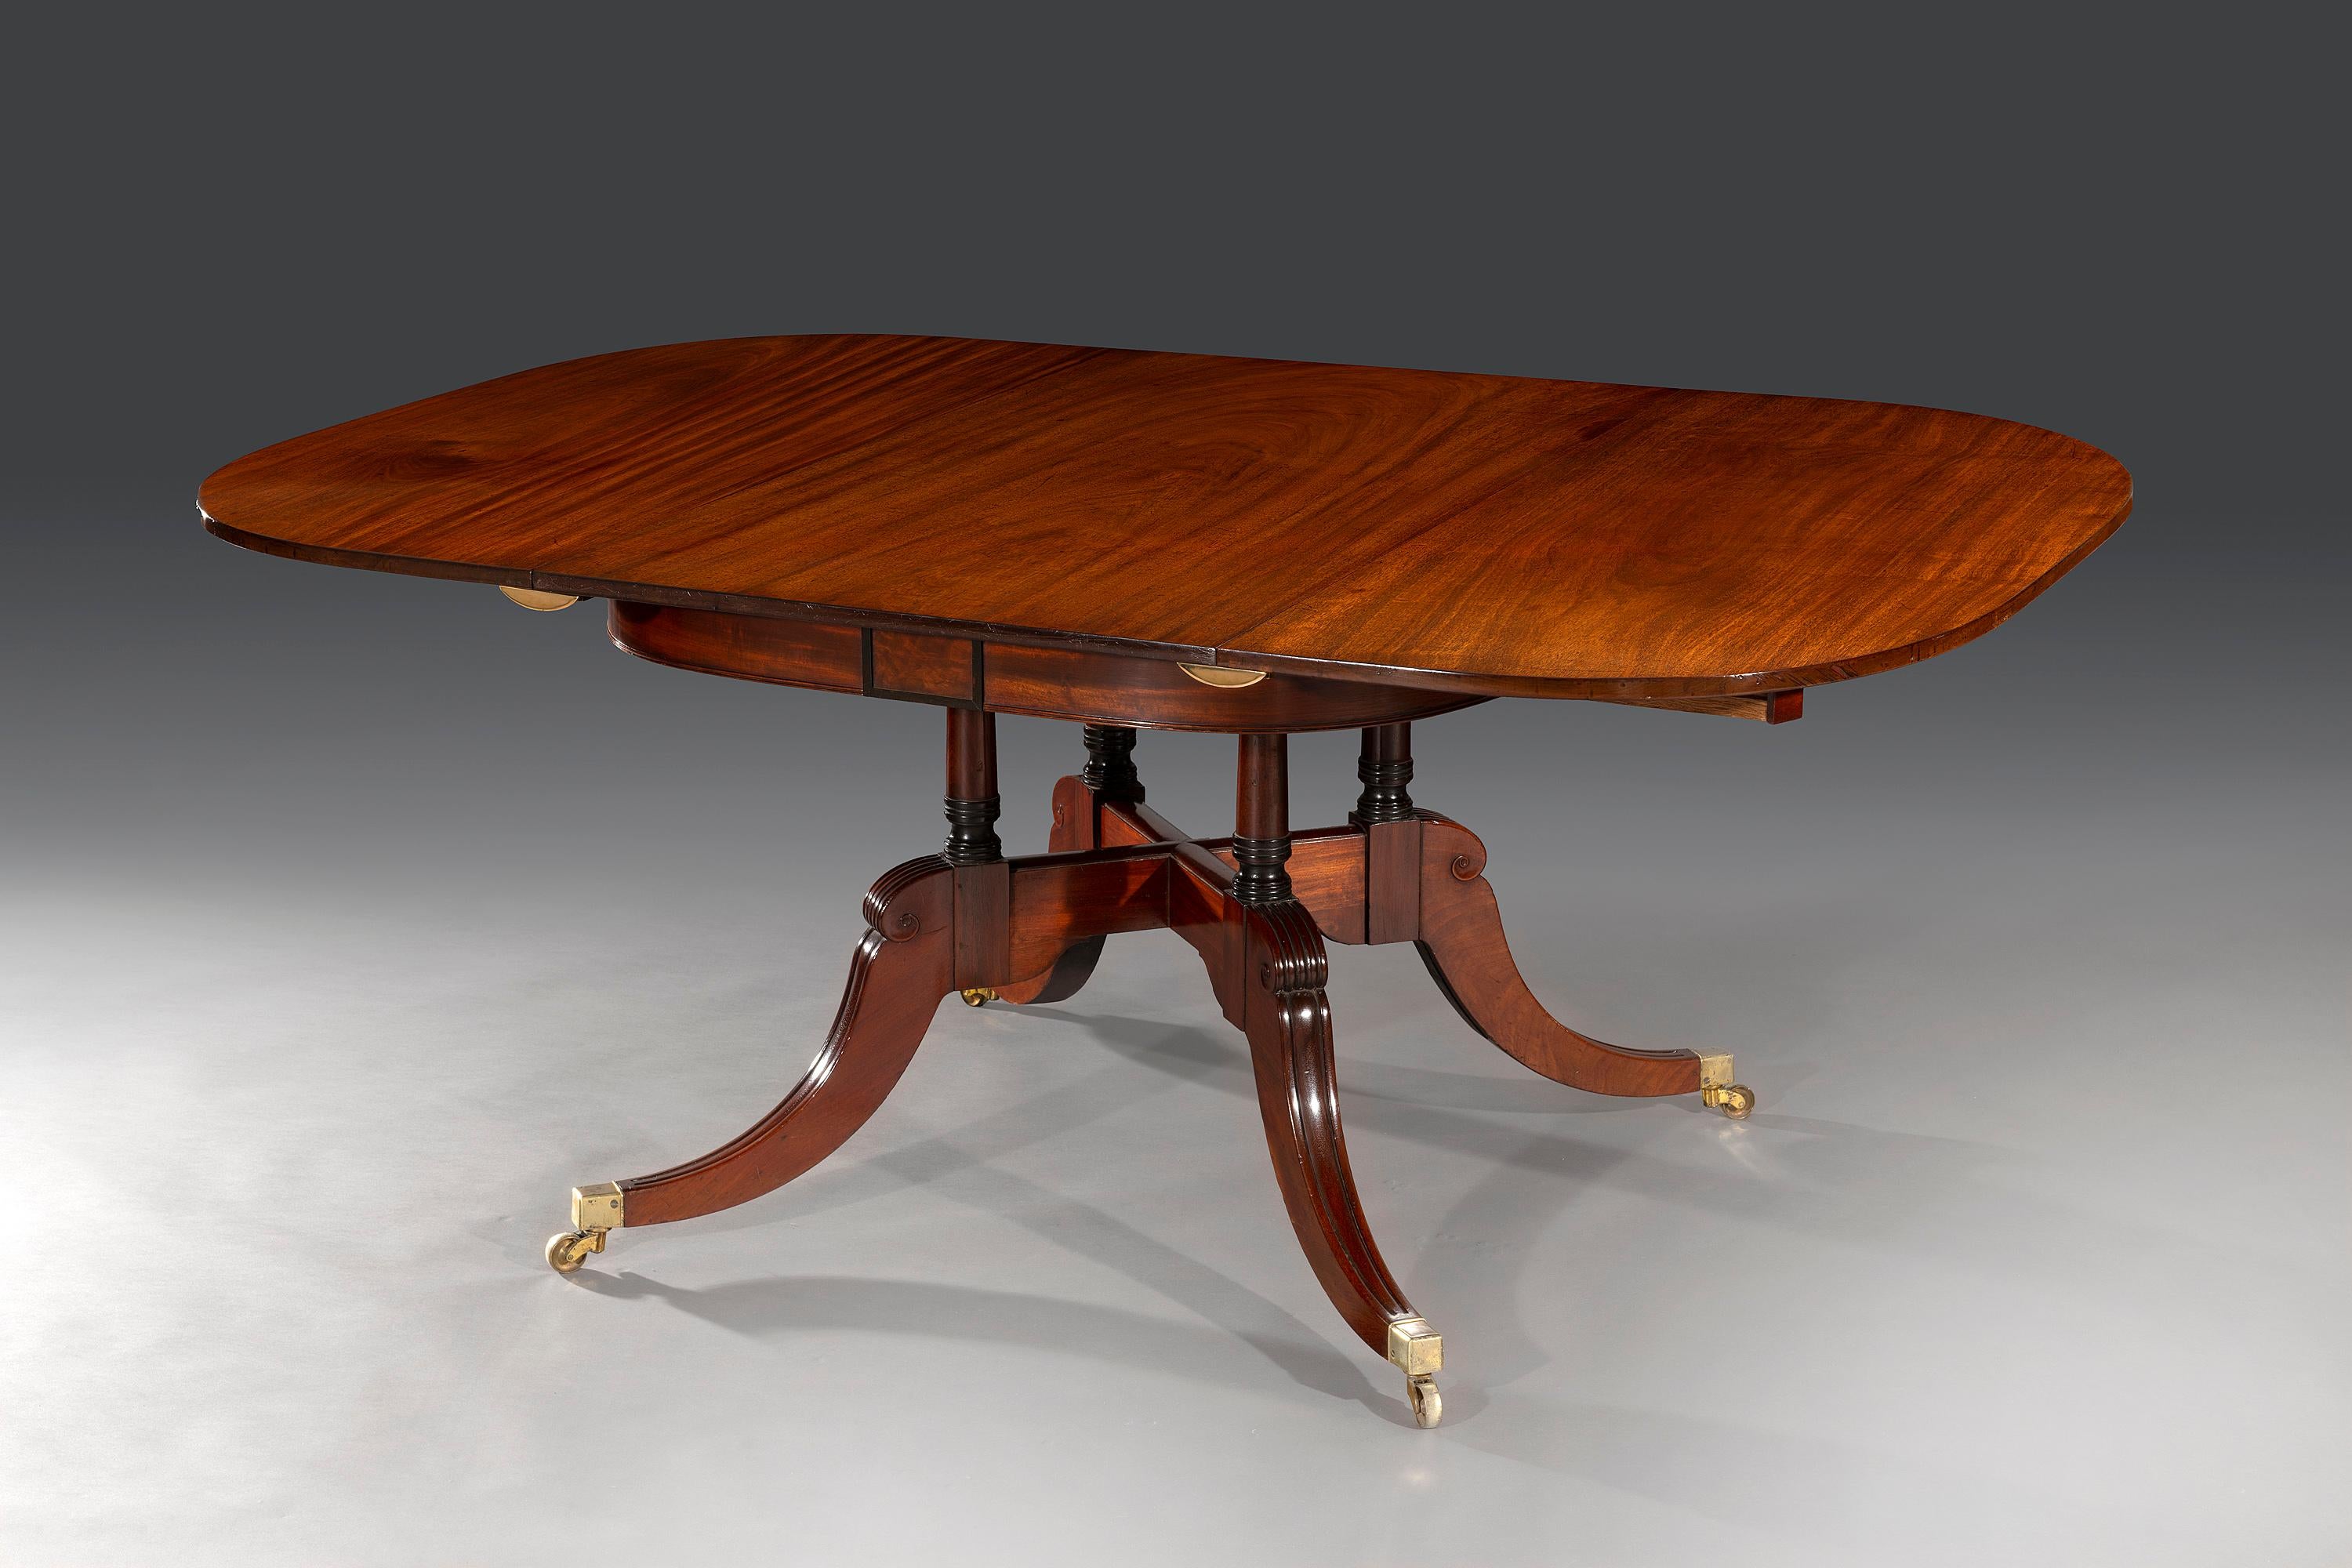 The mahogany top with rounded ends is well figured and opens to insert an additional mahogany leaf. The oak superstructure below is concealed and stamped with the makers impress mark, 'James Winter & Sons, Wardour Street, London'. The frieze centre